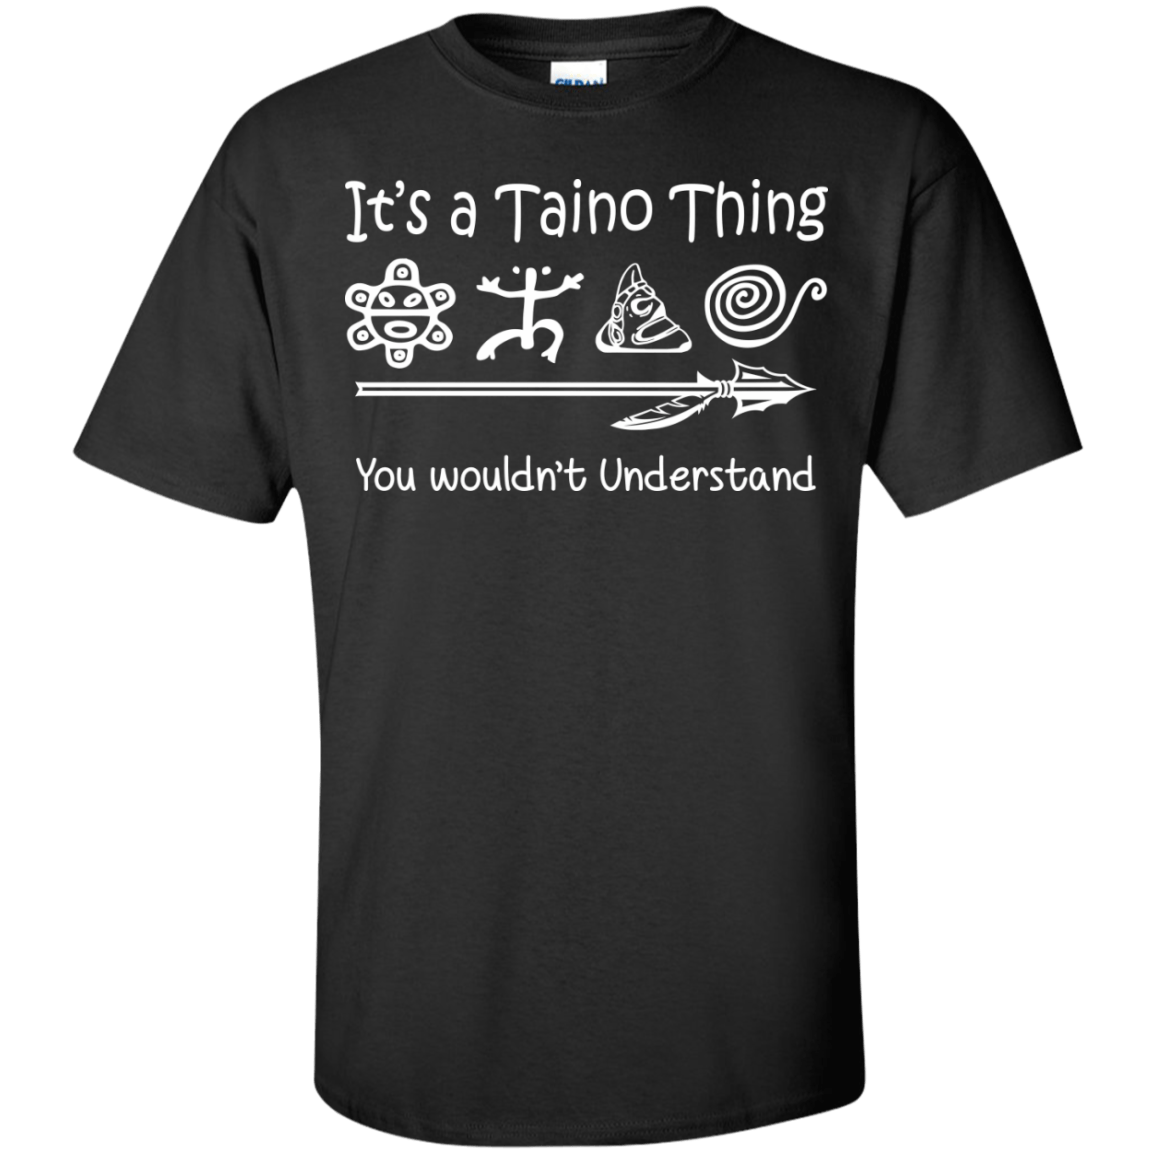 Youth Tee - It's A Taino Thing - Youth Tee